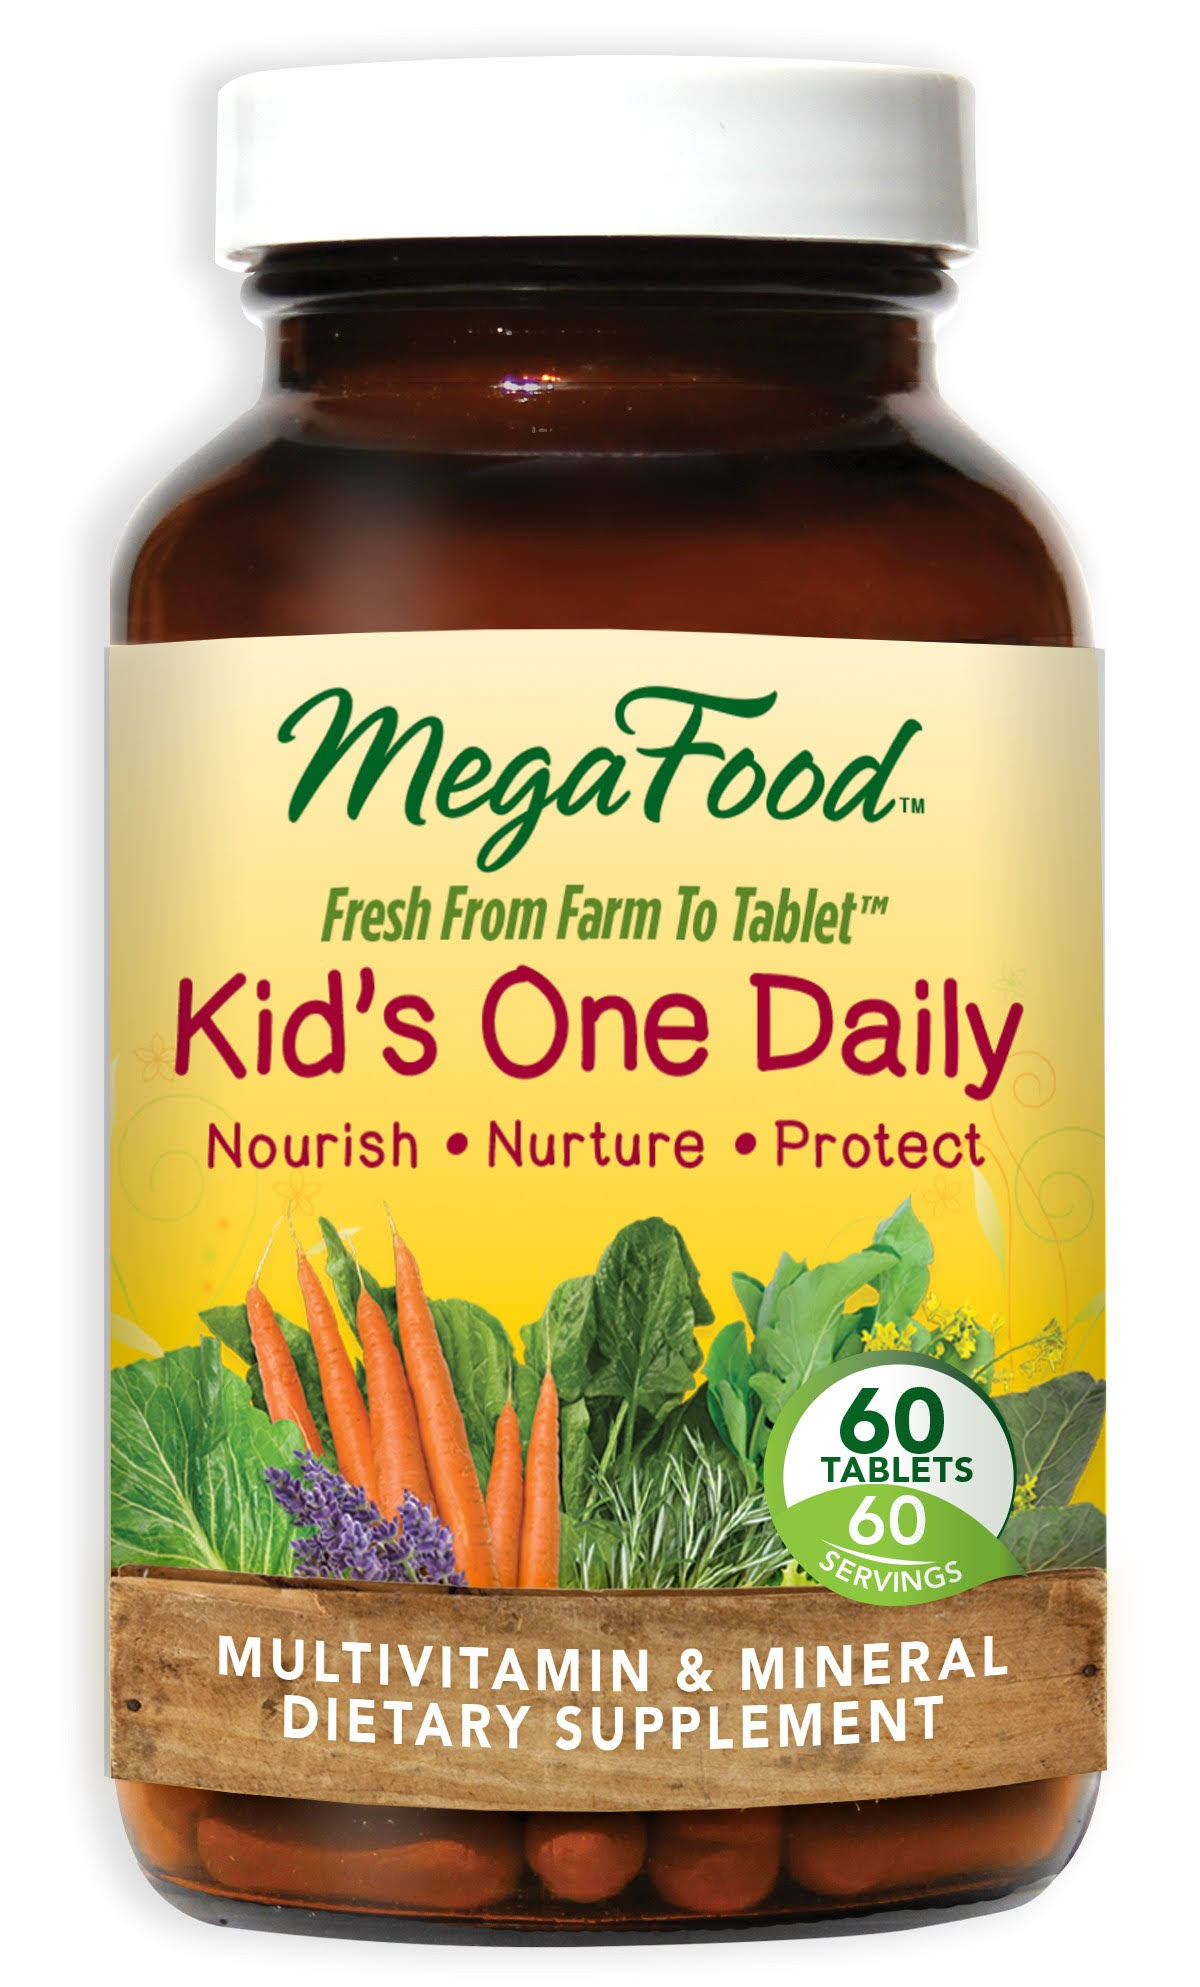 MegaFood Kid's One Daily Dietary Supplement - 60 Tablets